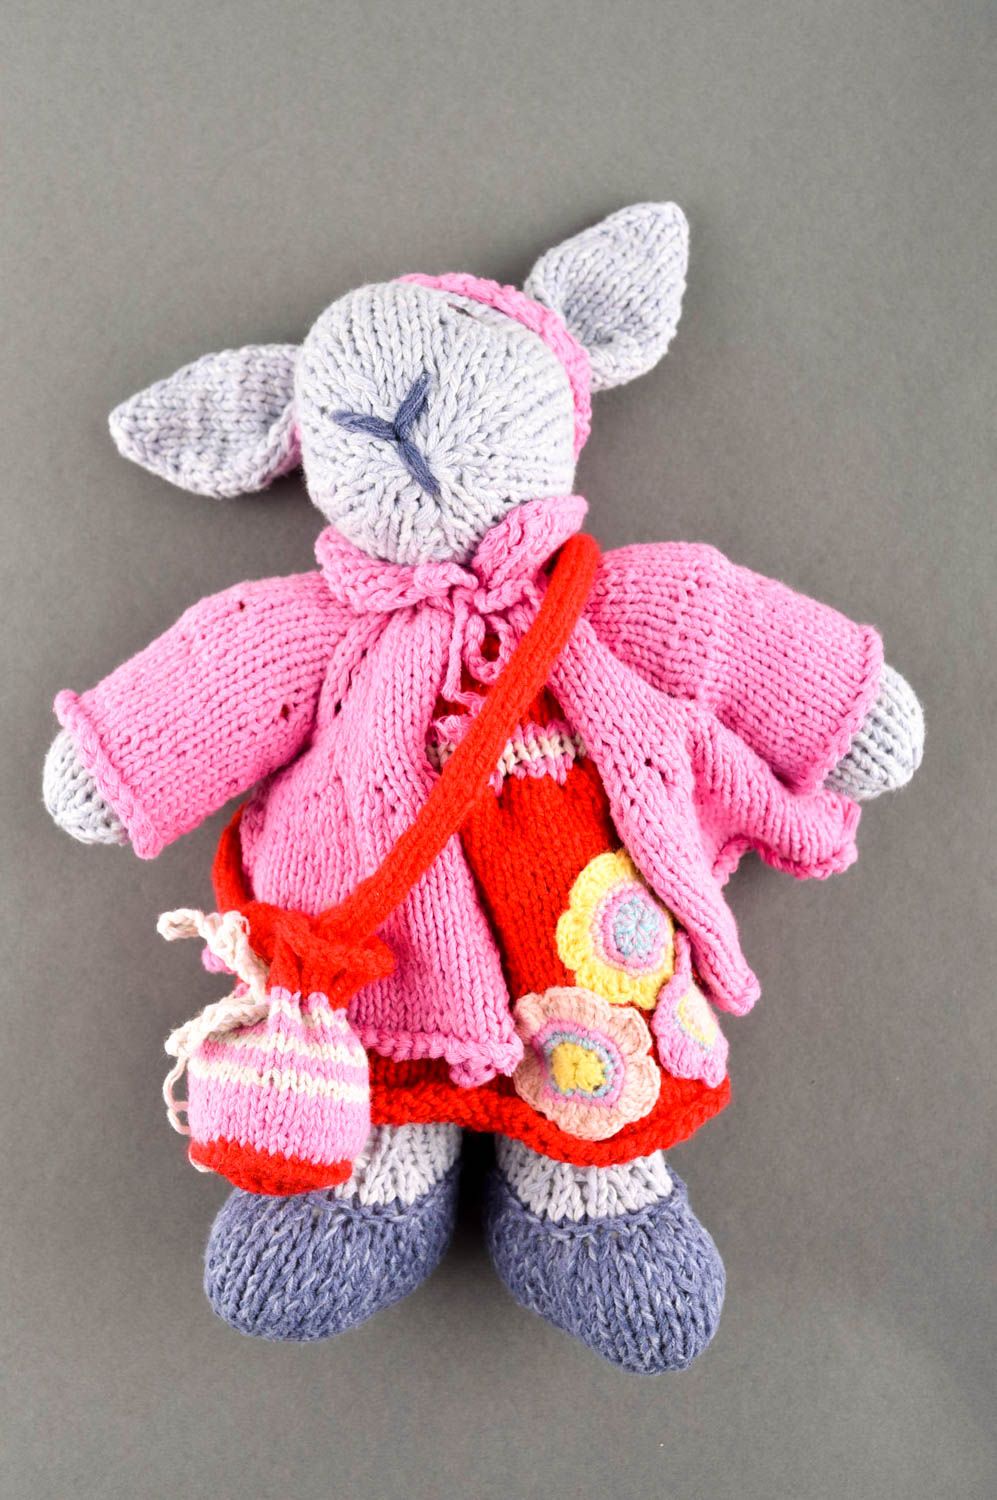 Handmade unusual soft toy textile toys for kids pink knitted rabbit toy photo 1